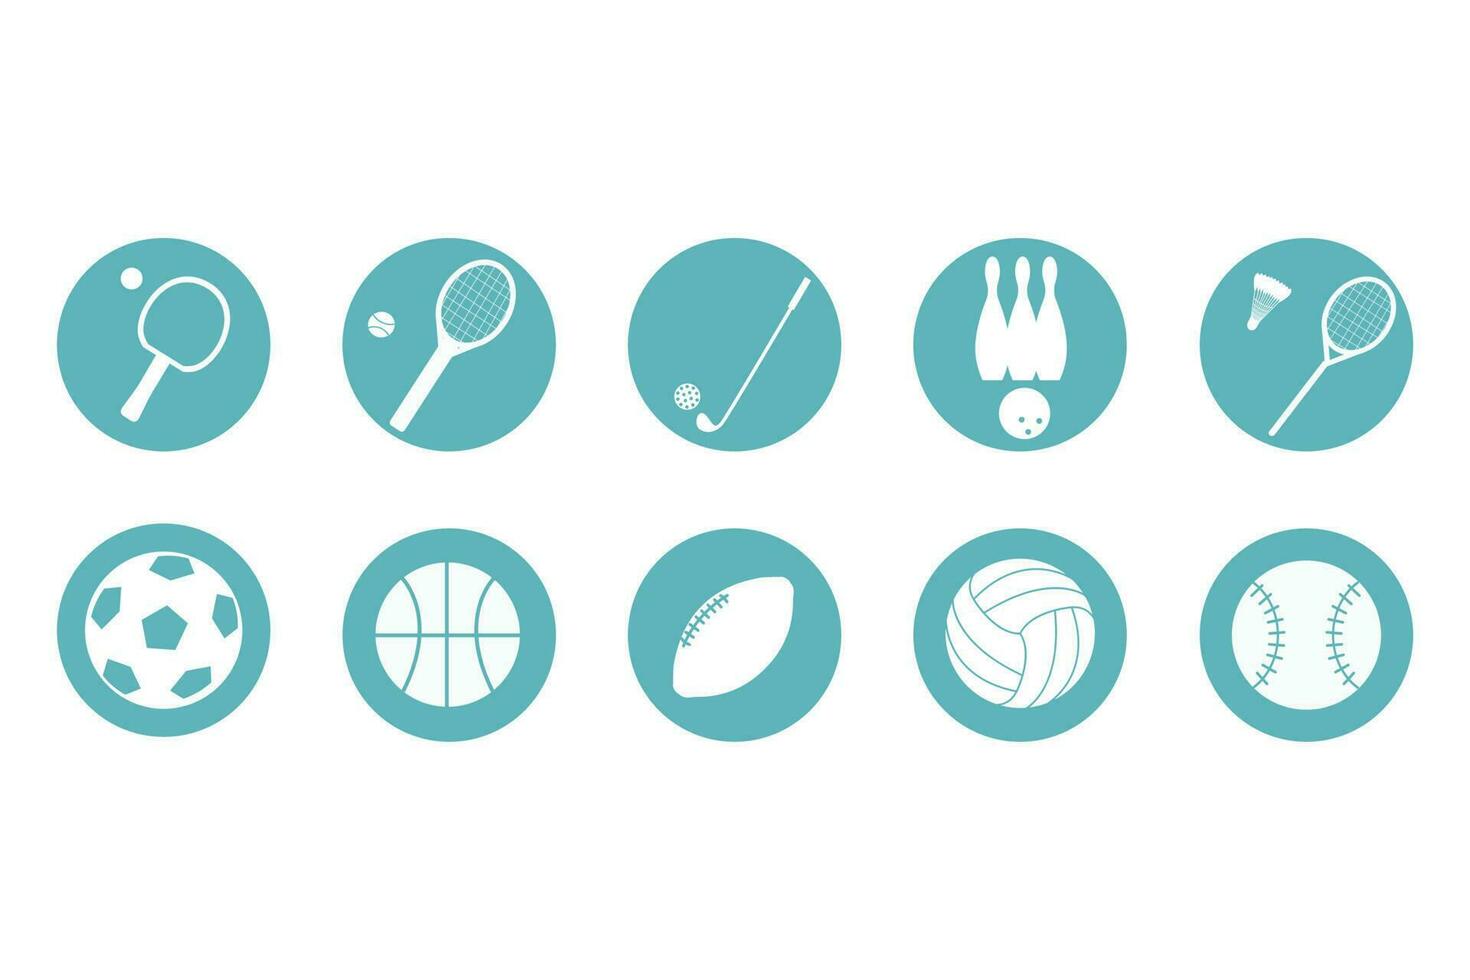 Portable equipment icons. Sports concept with balls and game items. Vector illustration